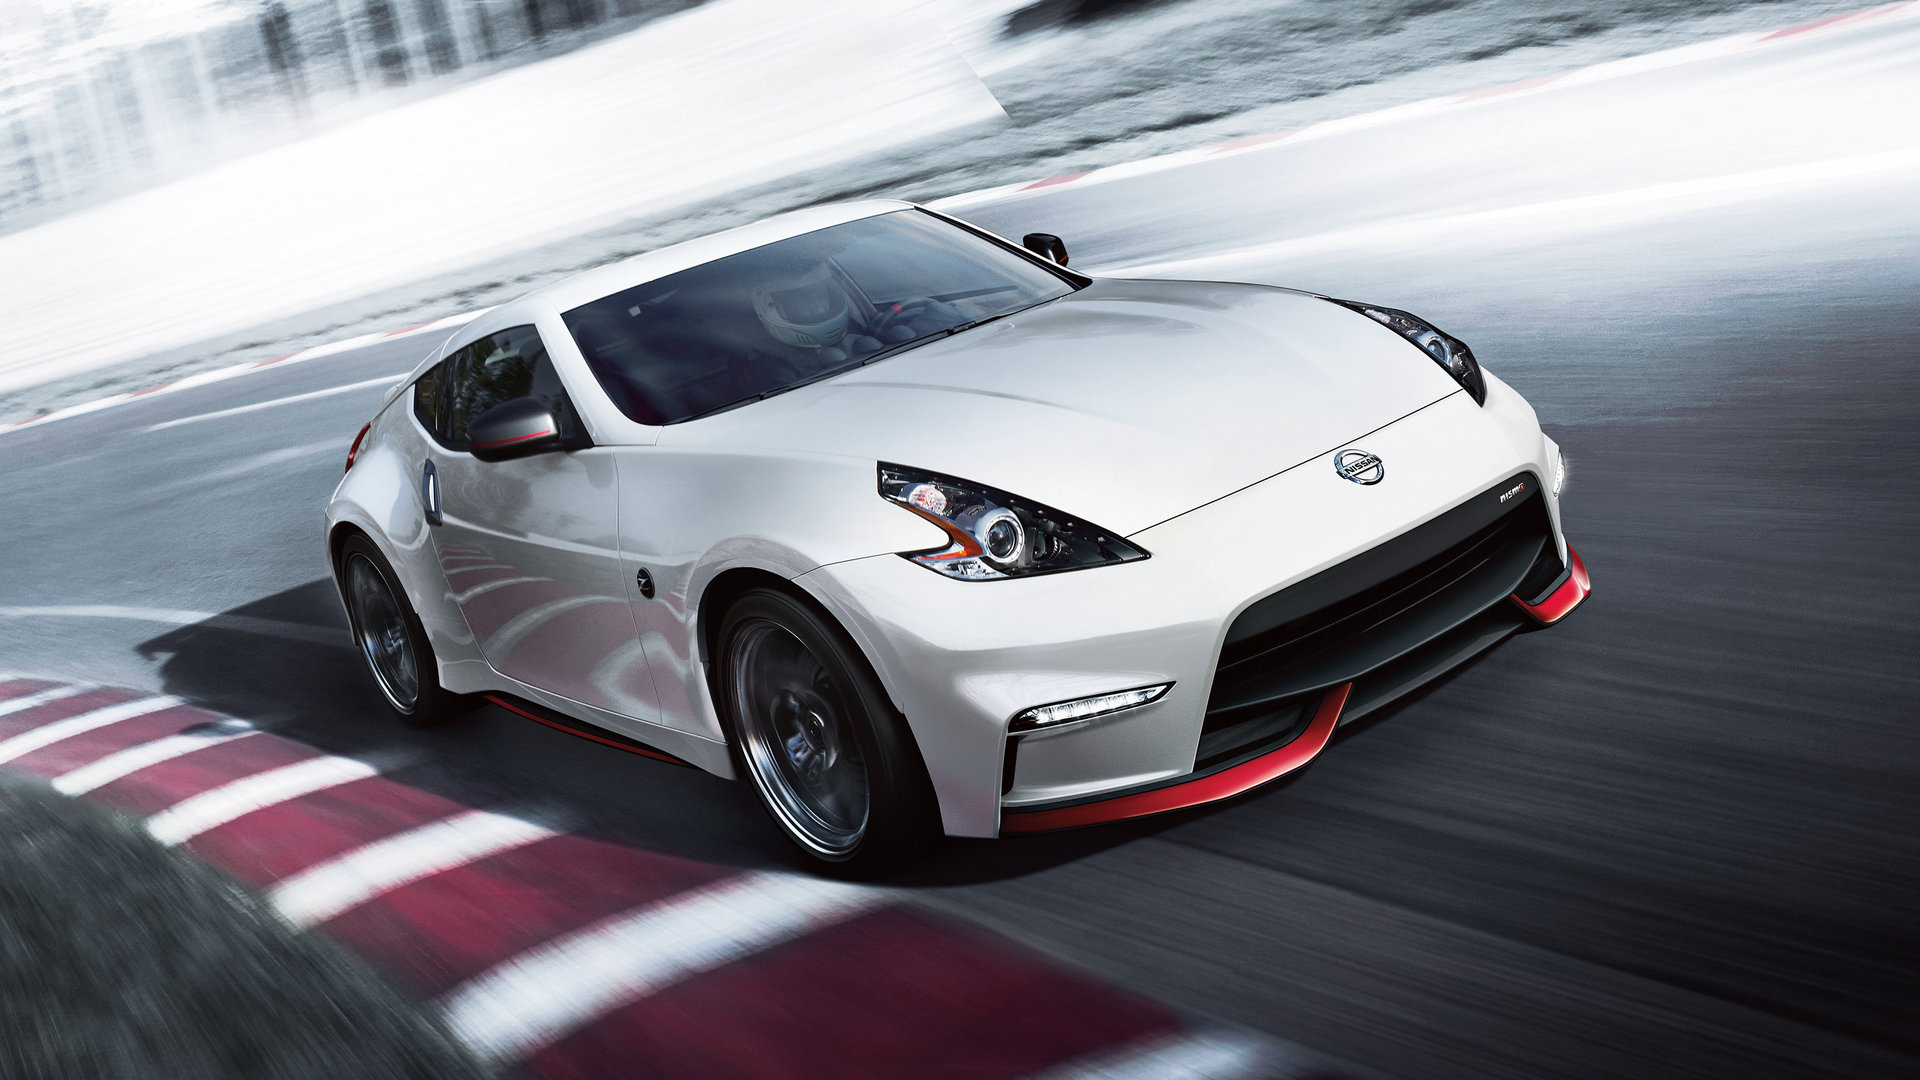 Free Download 2014 Nissan 370z Nismo Nissan Cars Background Images, Photos, Reviews